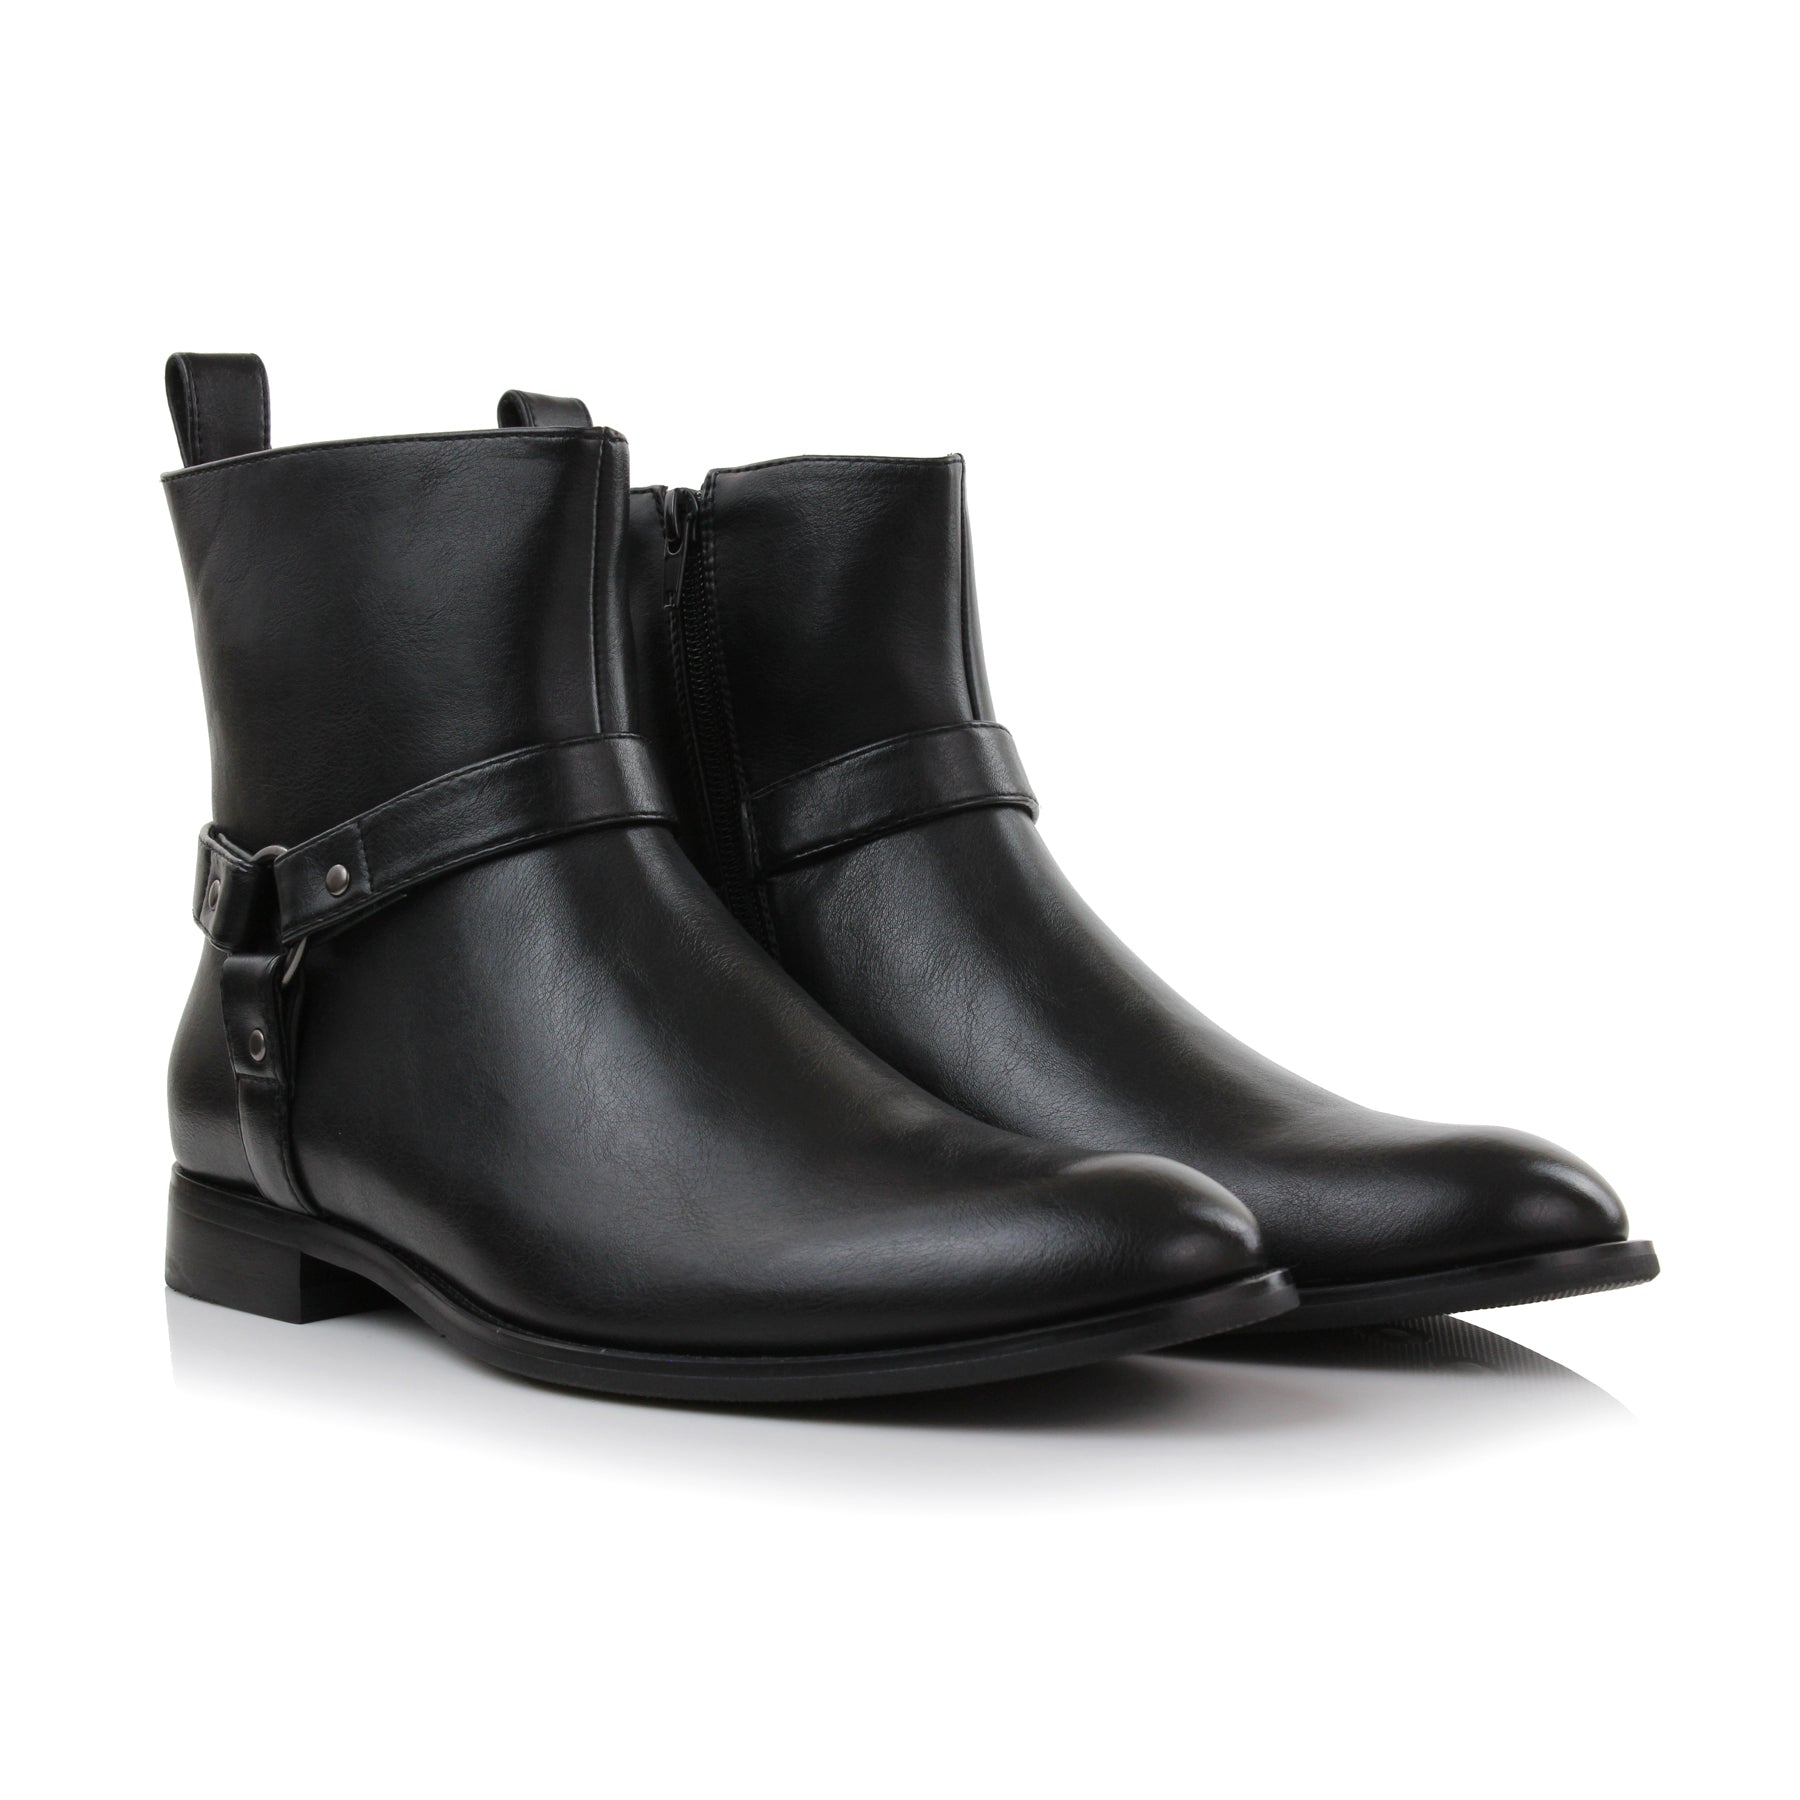 Modern Western Ankle Boots | Rhett by Polar Fox | Conal Footwear | Paired Angle View